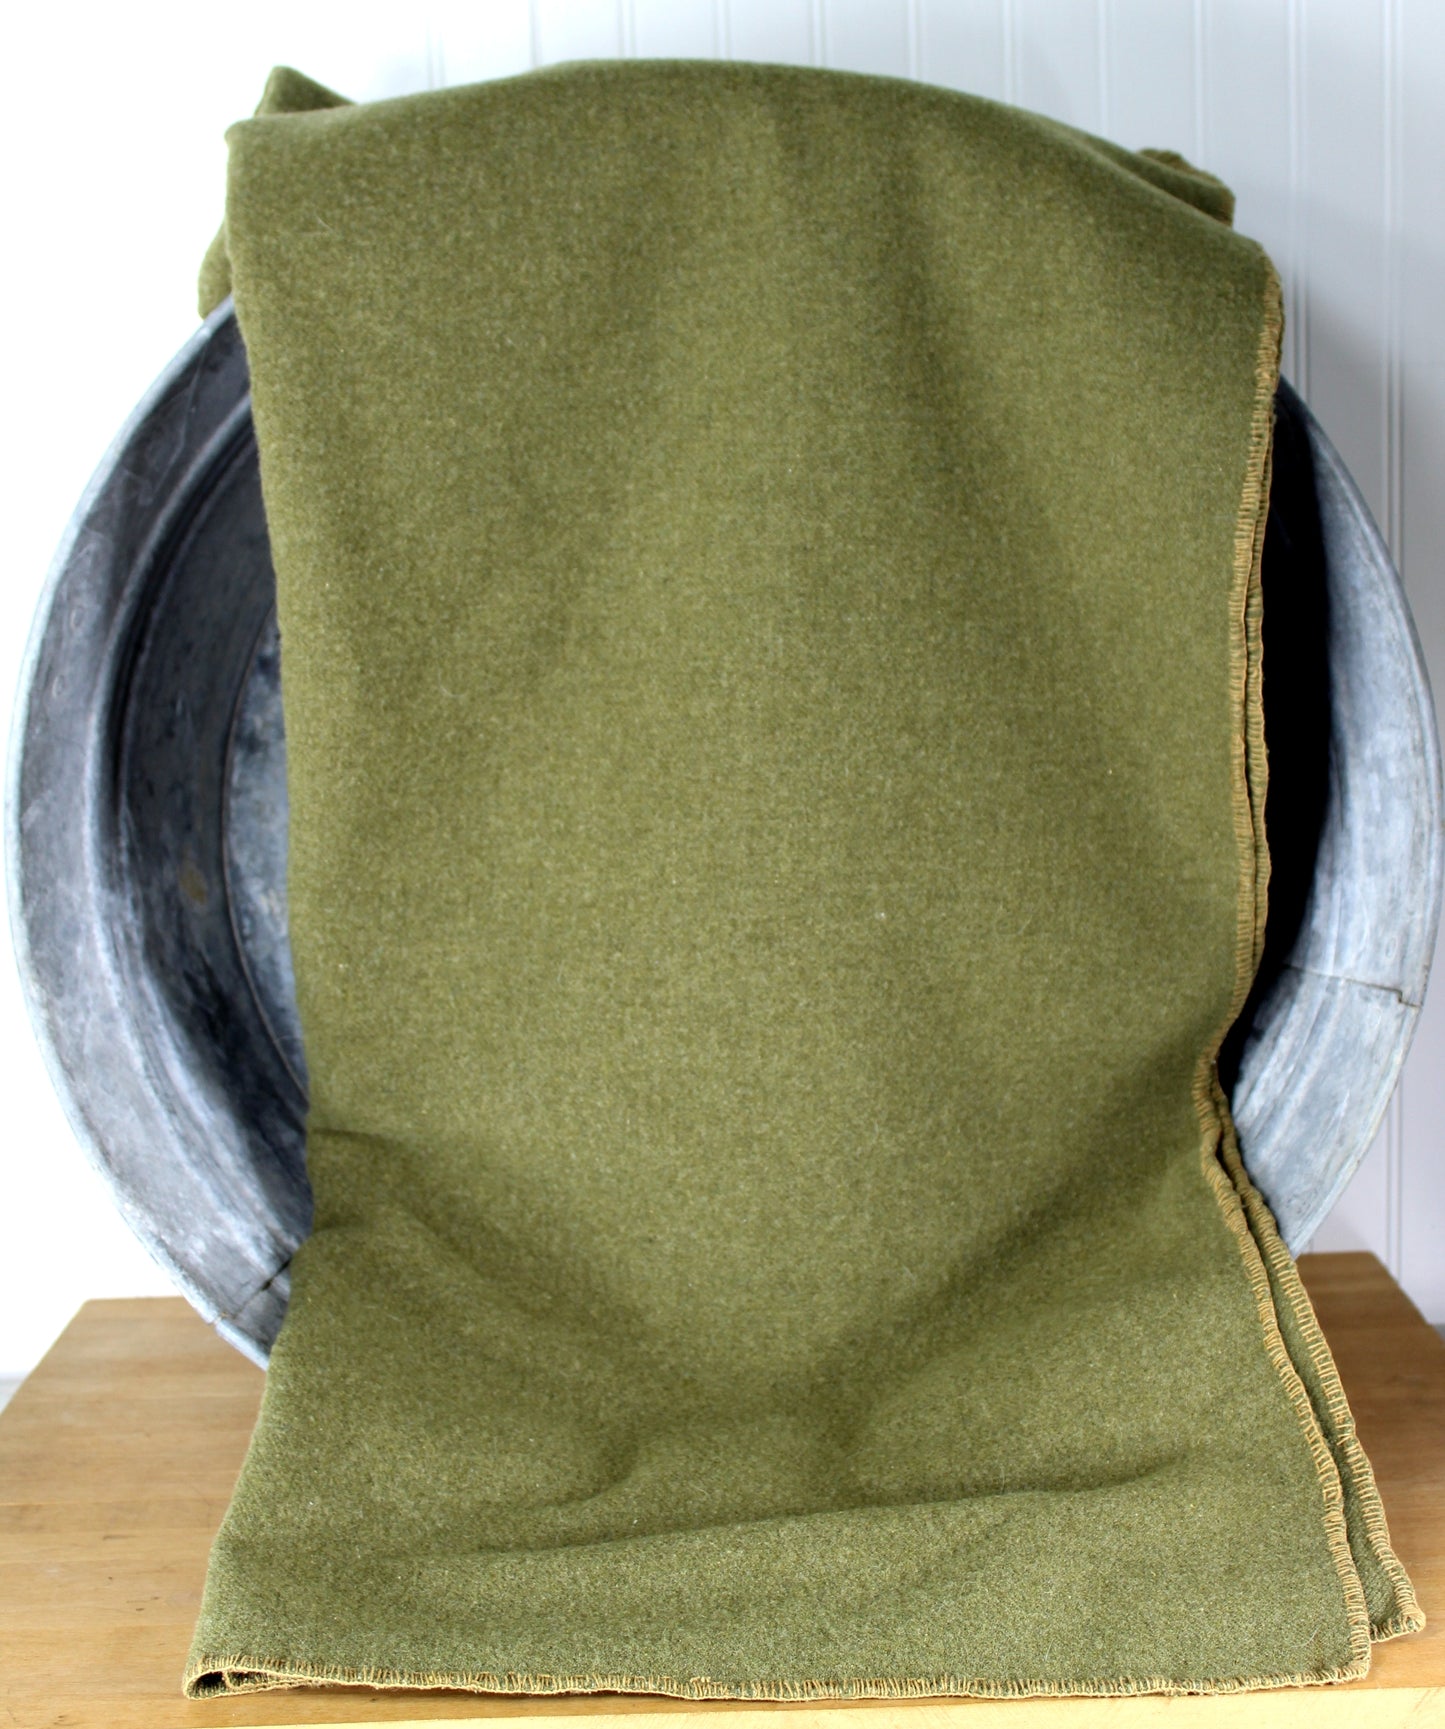 Military Wool Blanket - Estate Note marked WW1 ~ Olive Green - 55" X 74" olive drab color